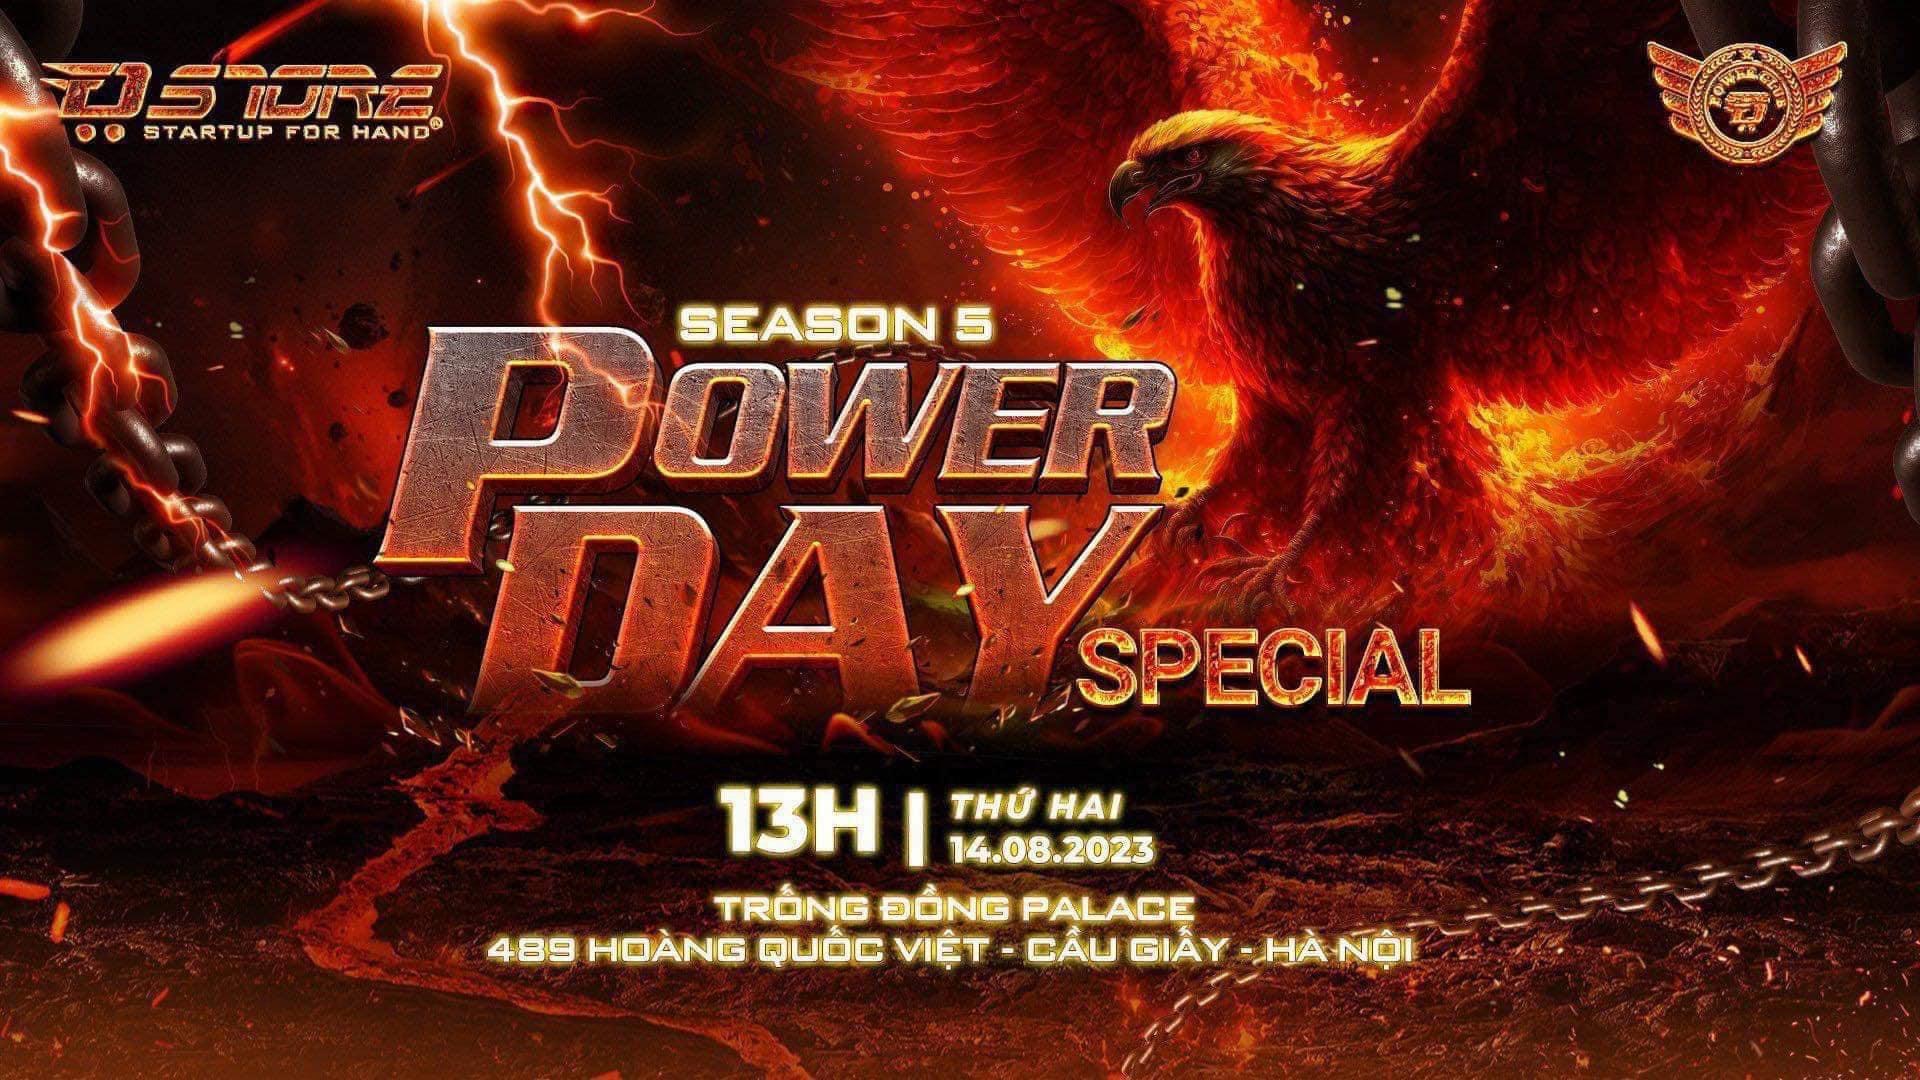 Season 5- POWER DAY SPECIAL Dstore Hà Nội